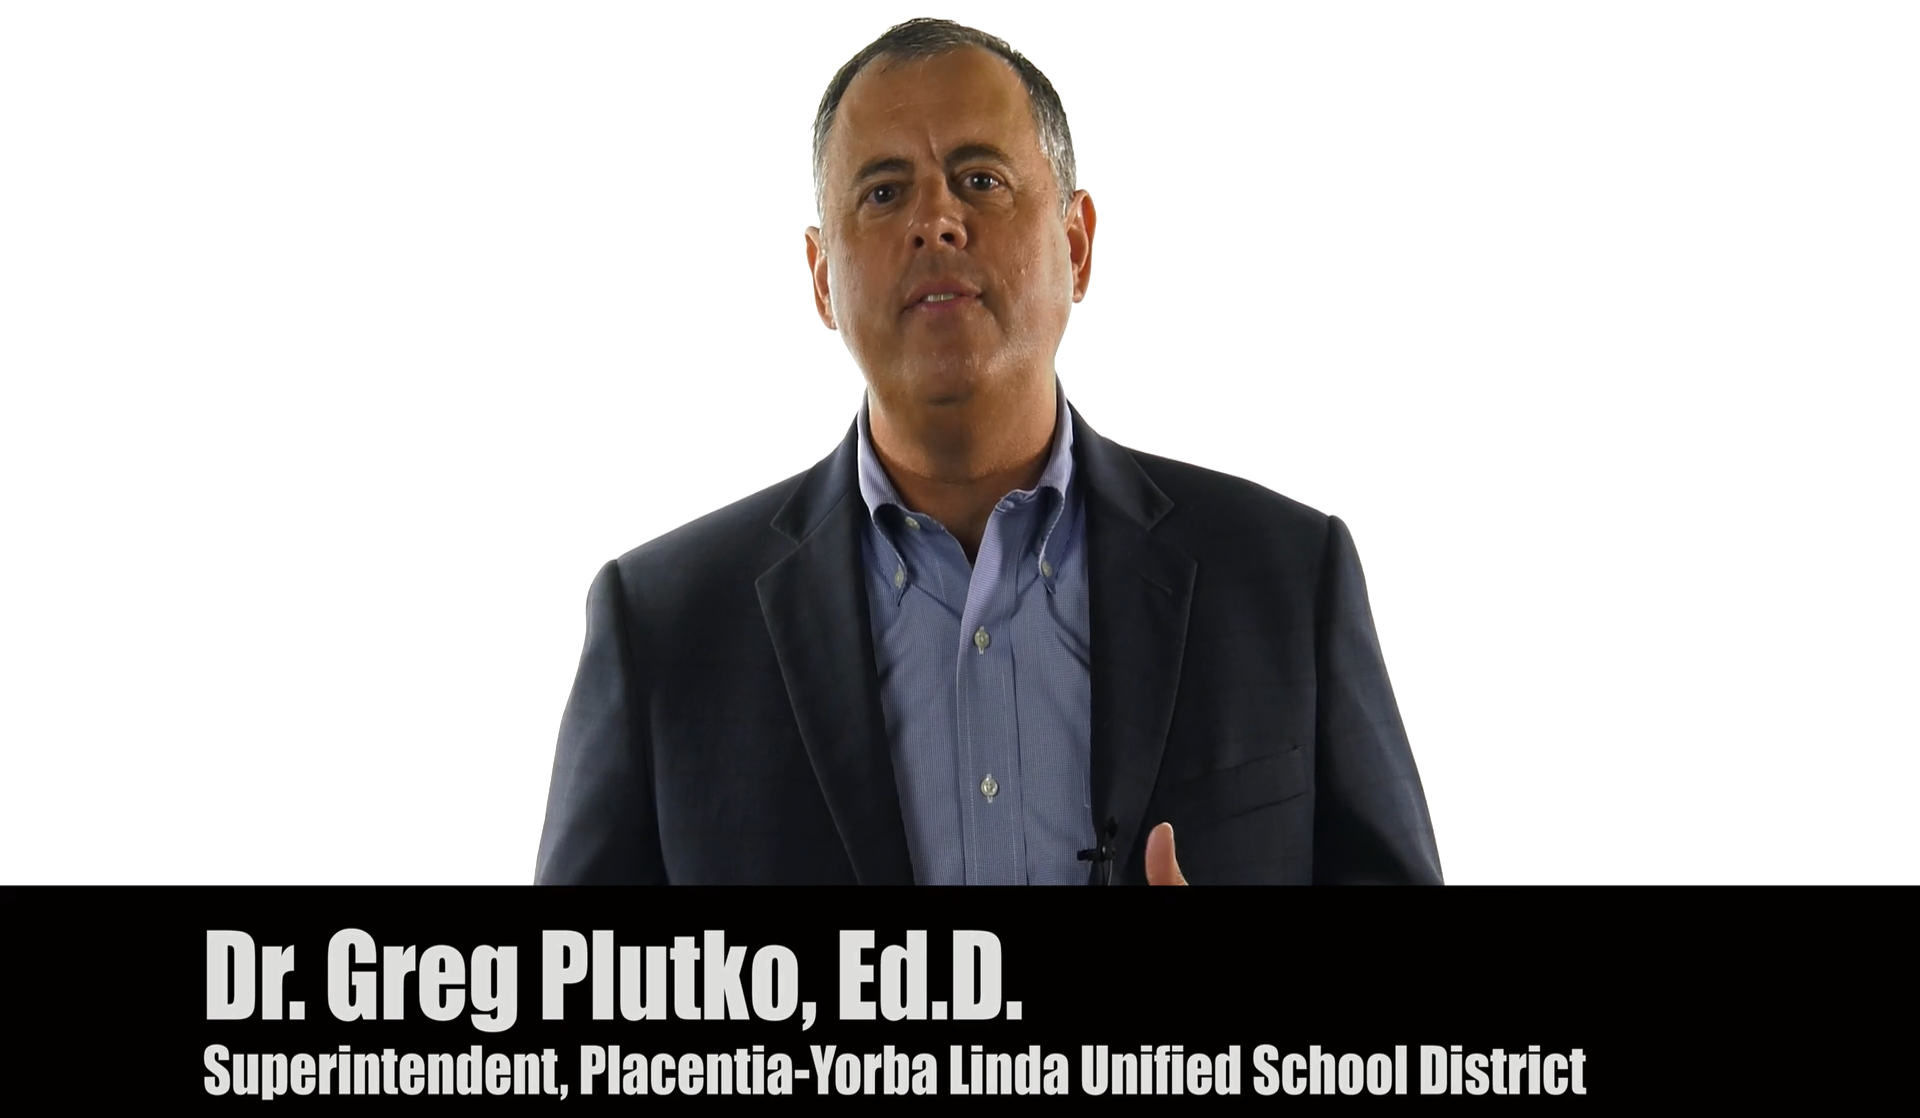 Superintendent, Dr. Greg Plutko, shared the below video with employees district-wide.